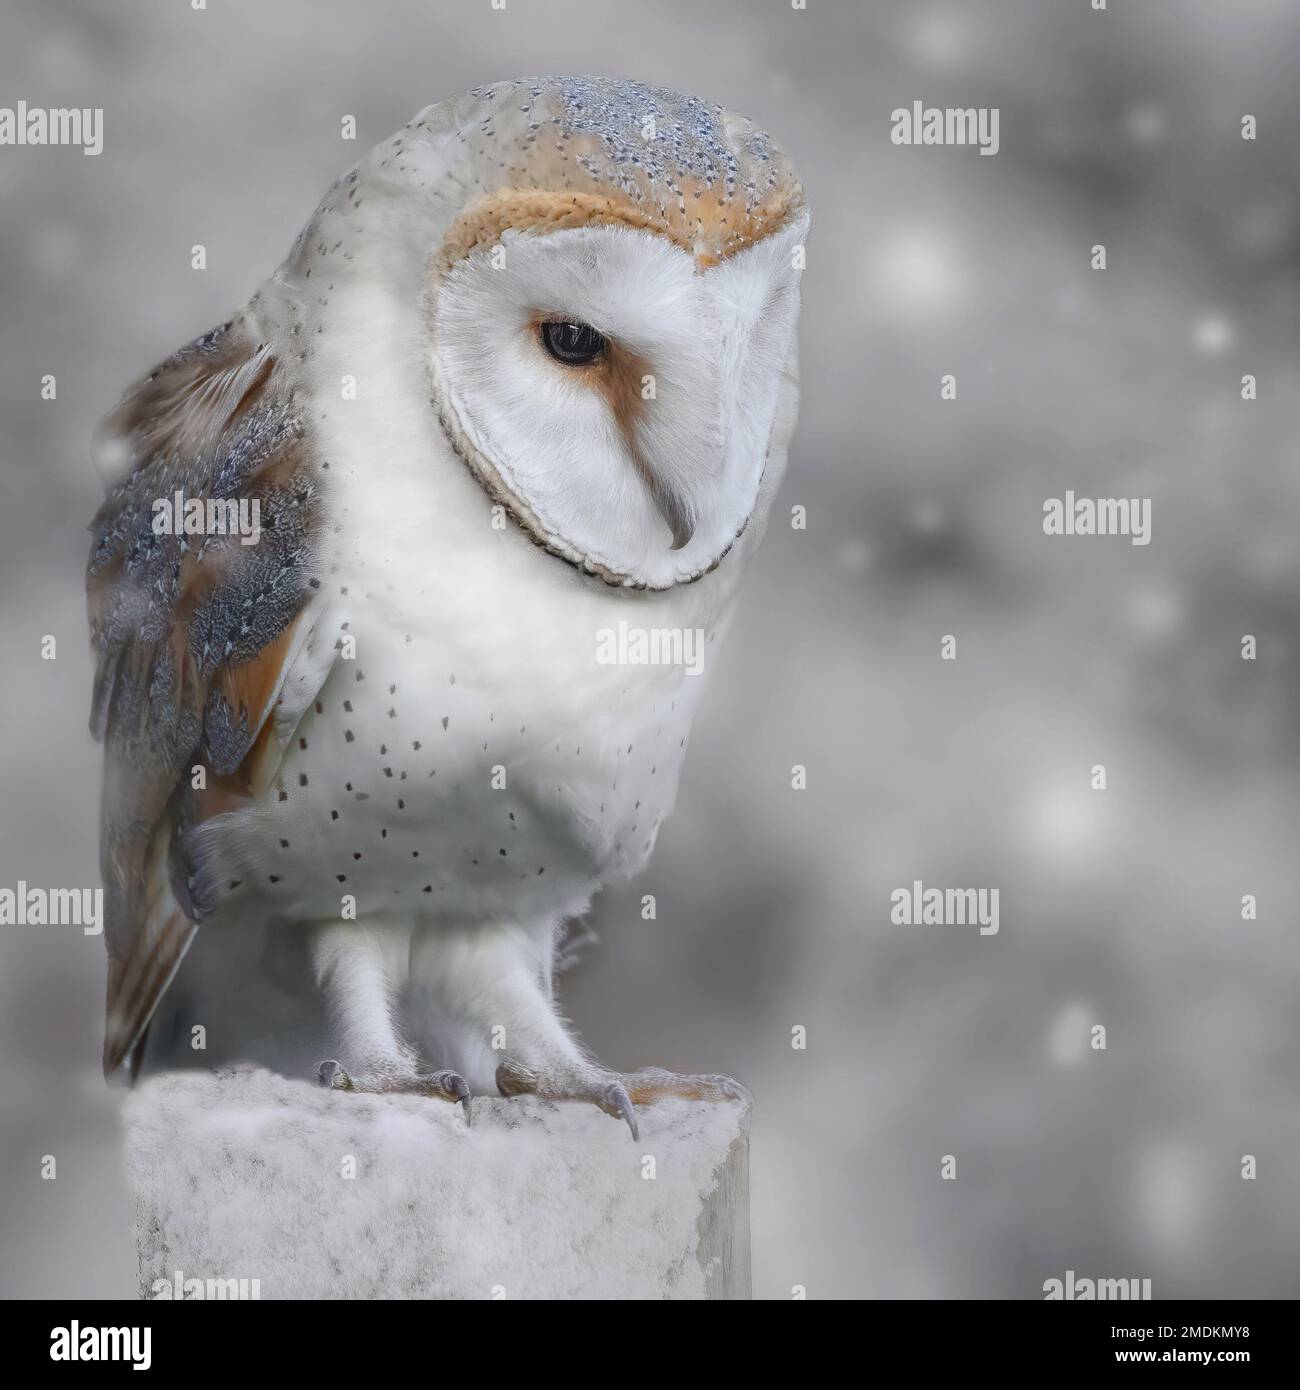 Hiding in the snow. Yorkshire, UK: THESE STUNNING images taken on last Friday 20th January show a Yorkshire barn owl darting in and out of the falling Stock Photo